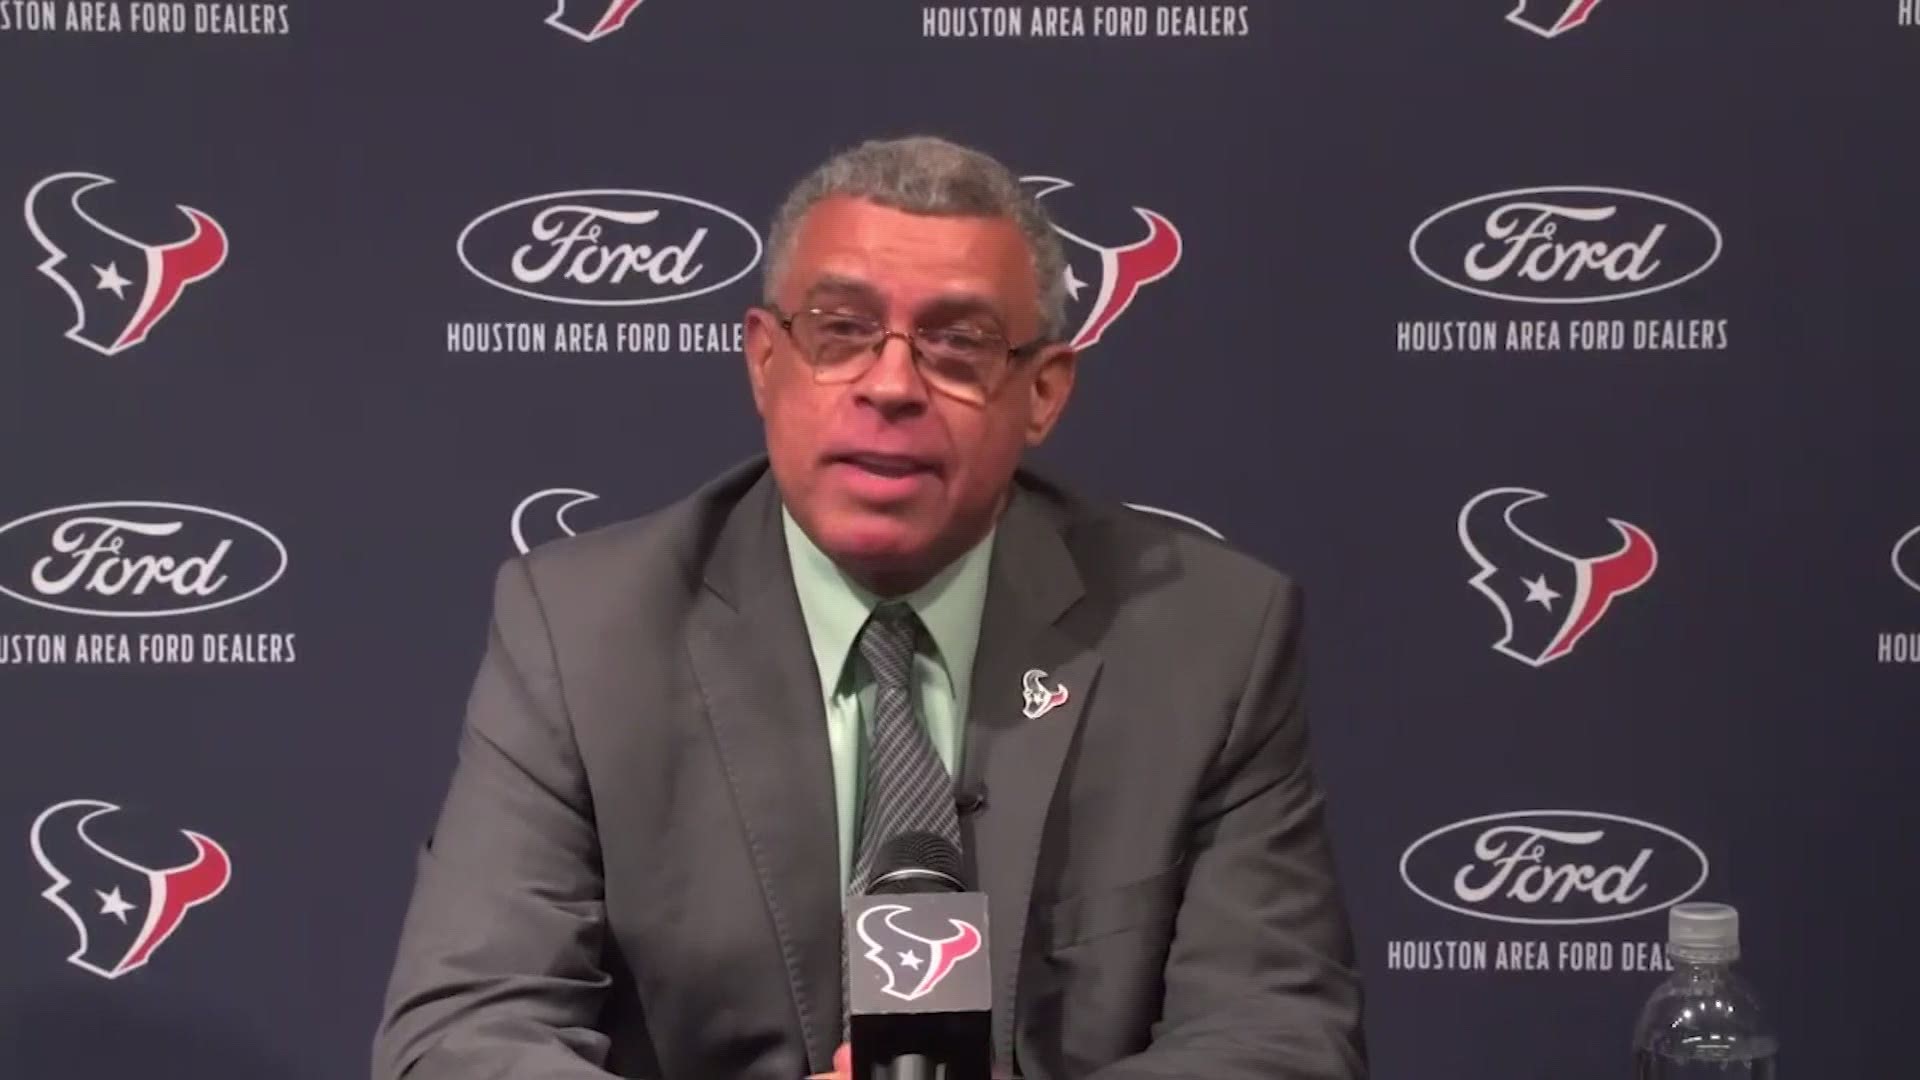 The Houston Texans introduced their new head coach David Culley at a news conference Friday, Jam. 29.